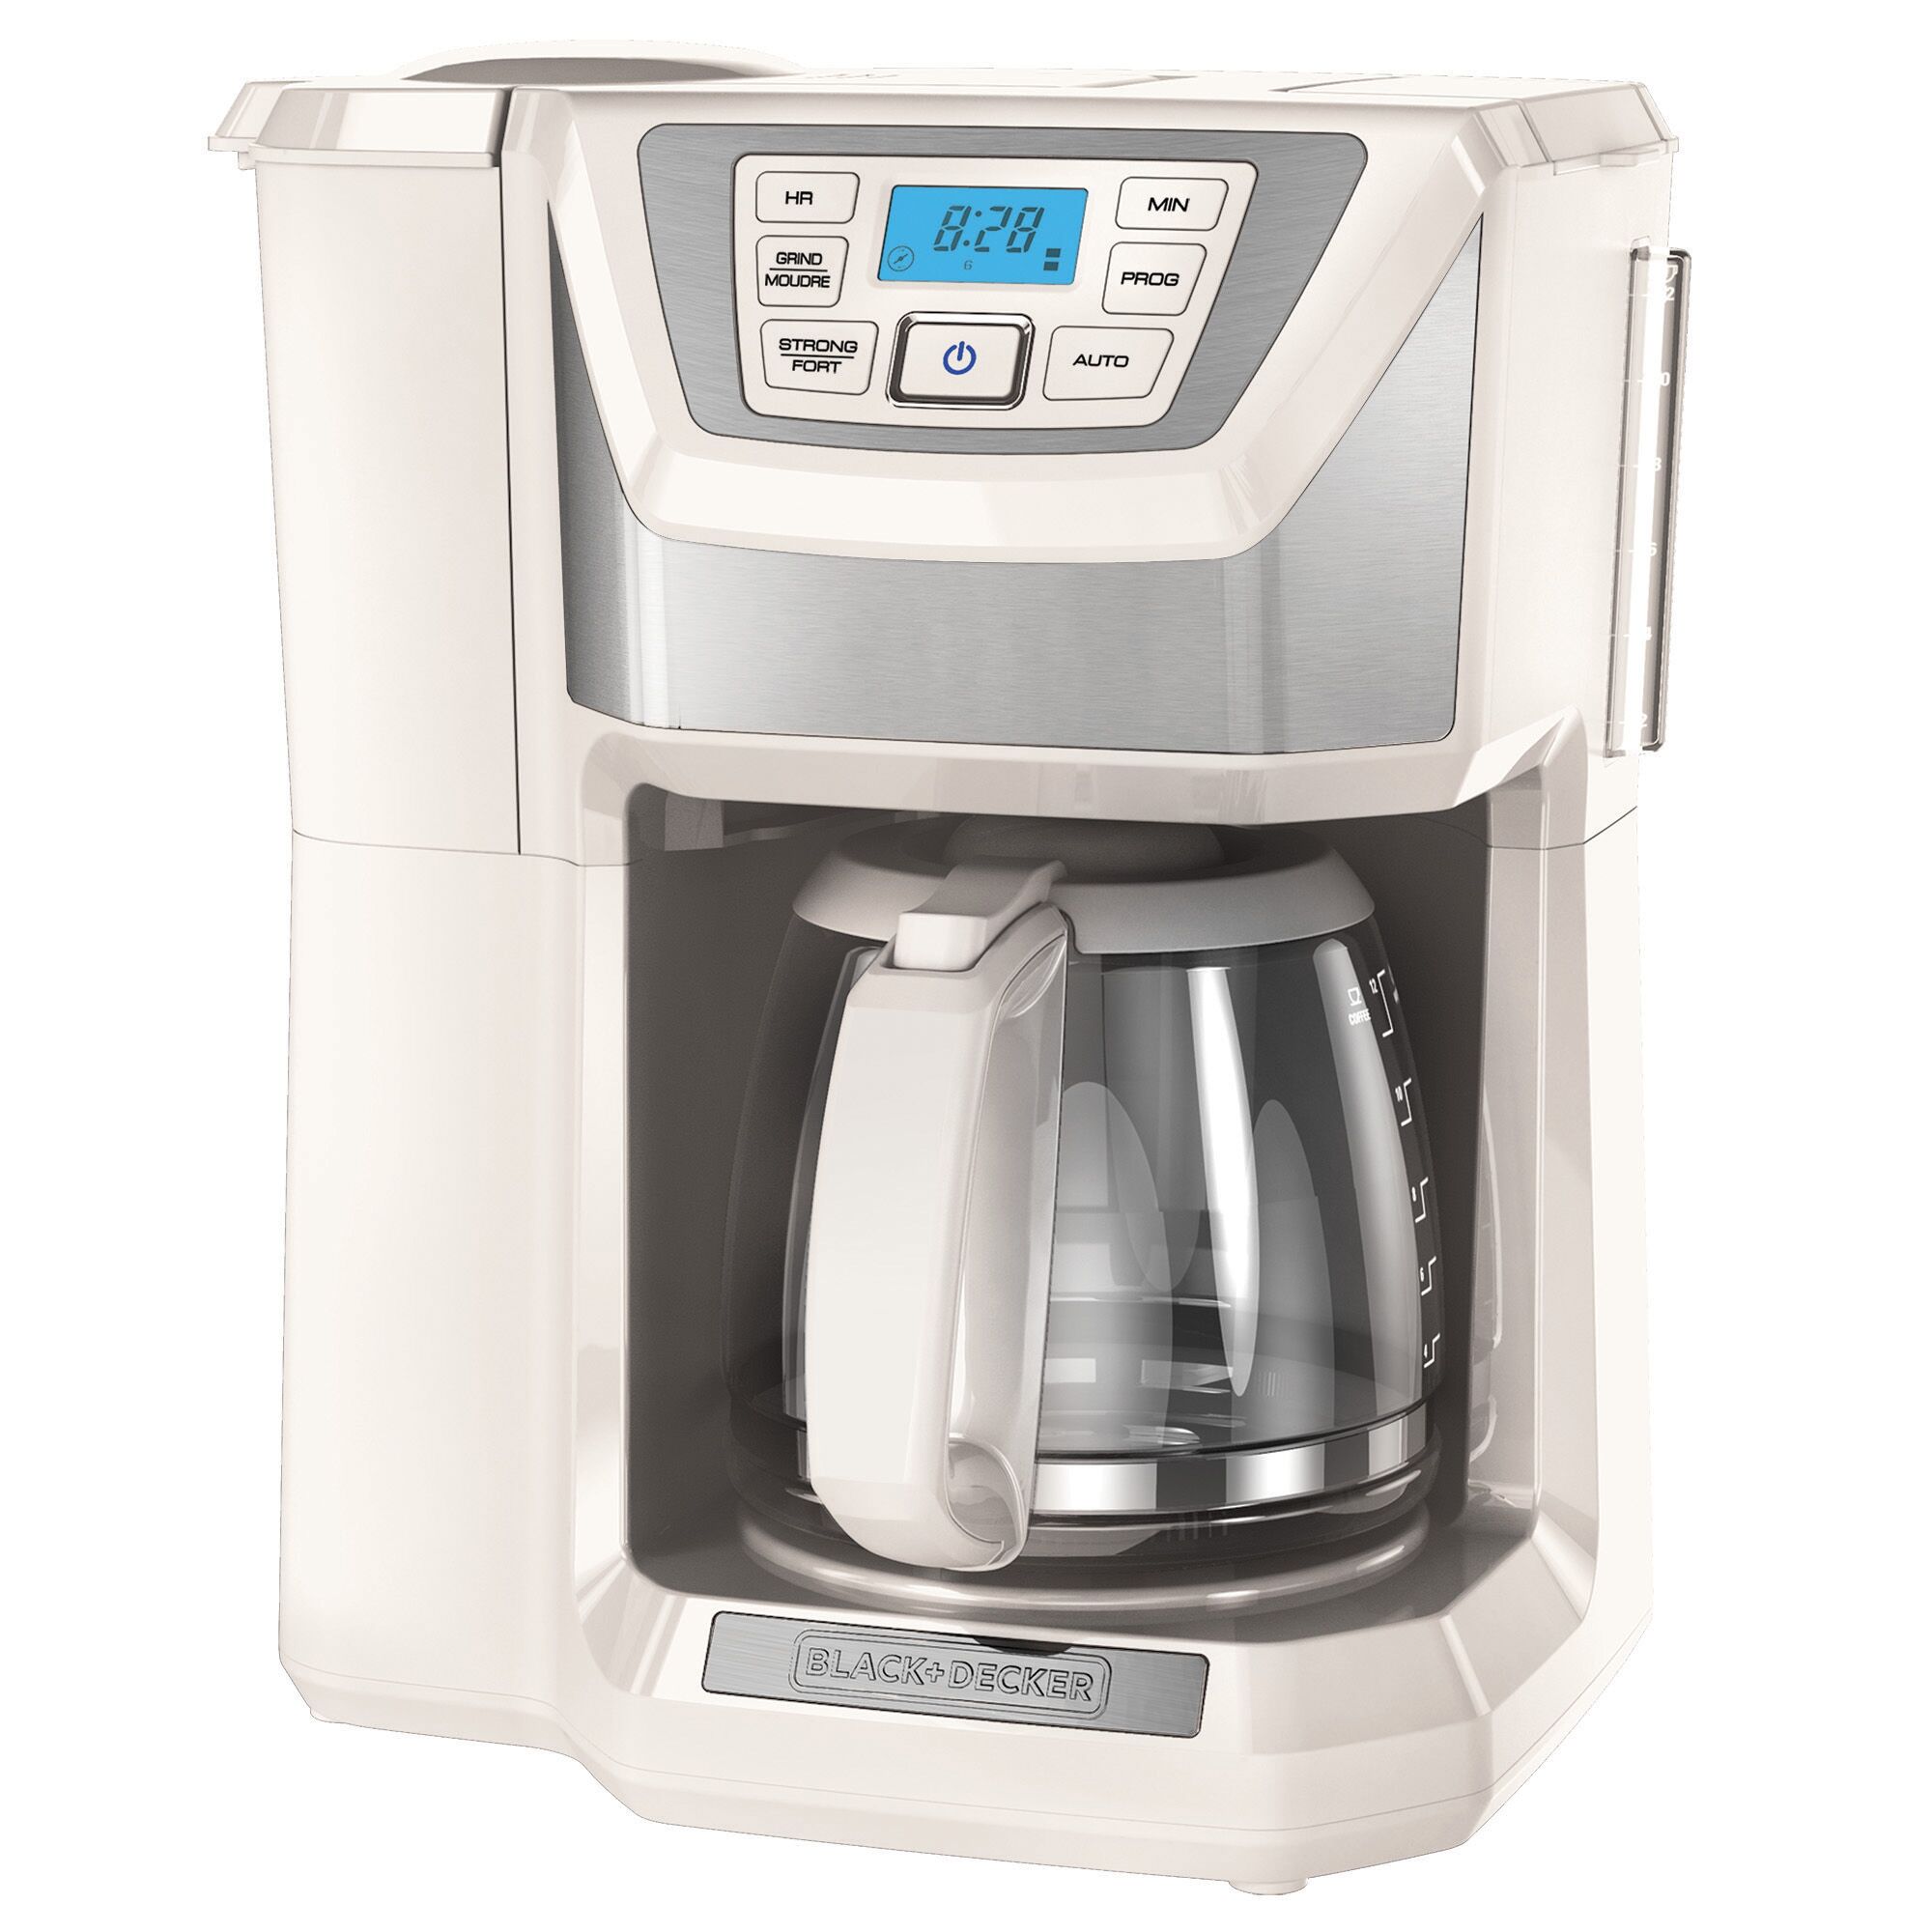 Profile of 12 cup mill plus brew coffee maker.